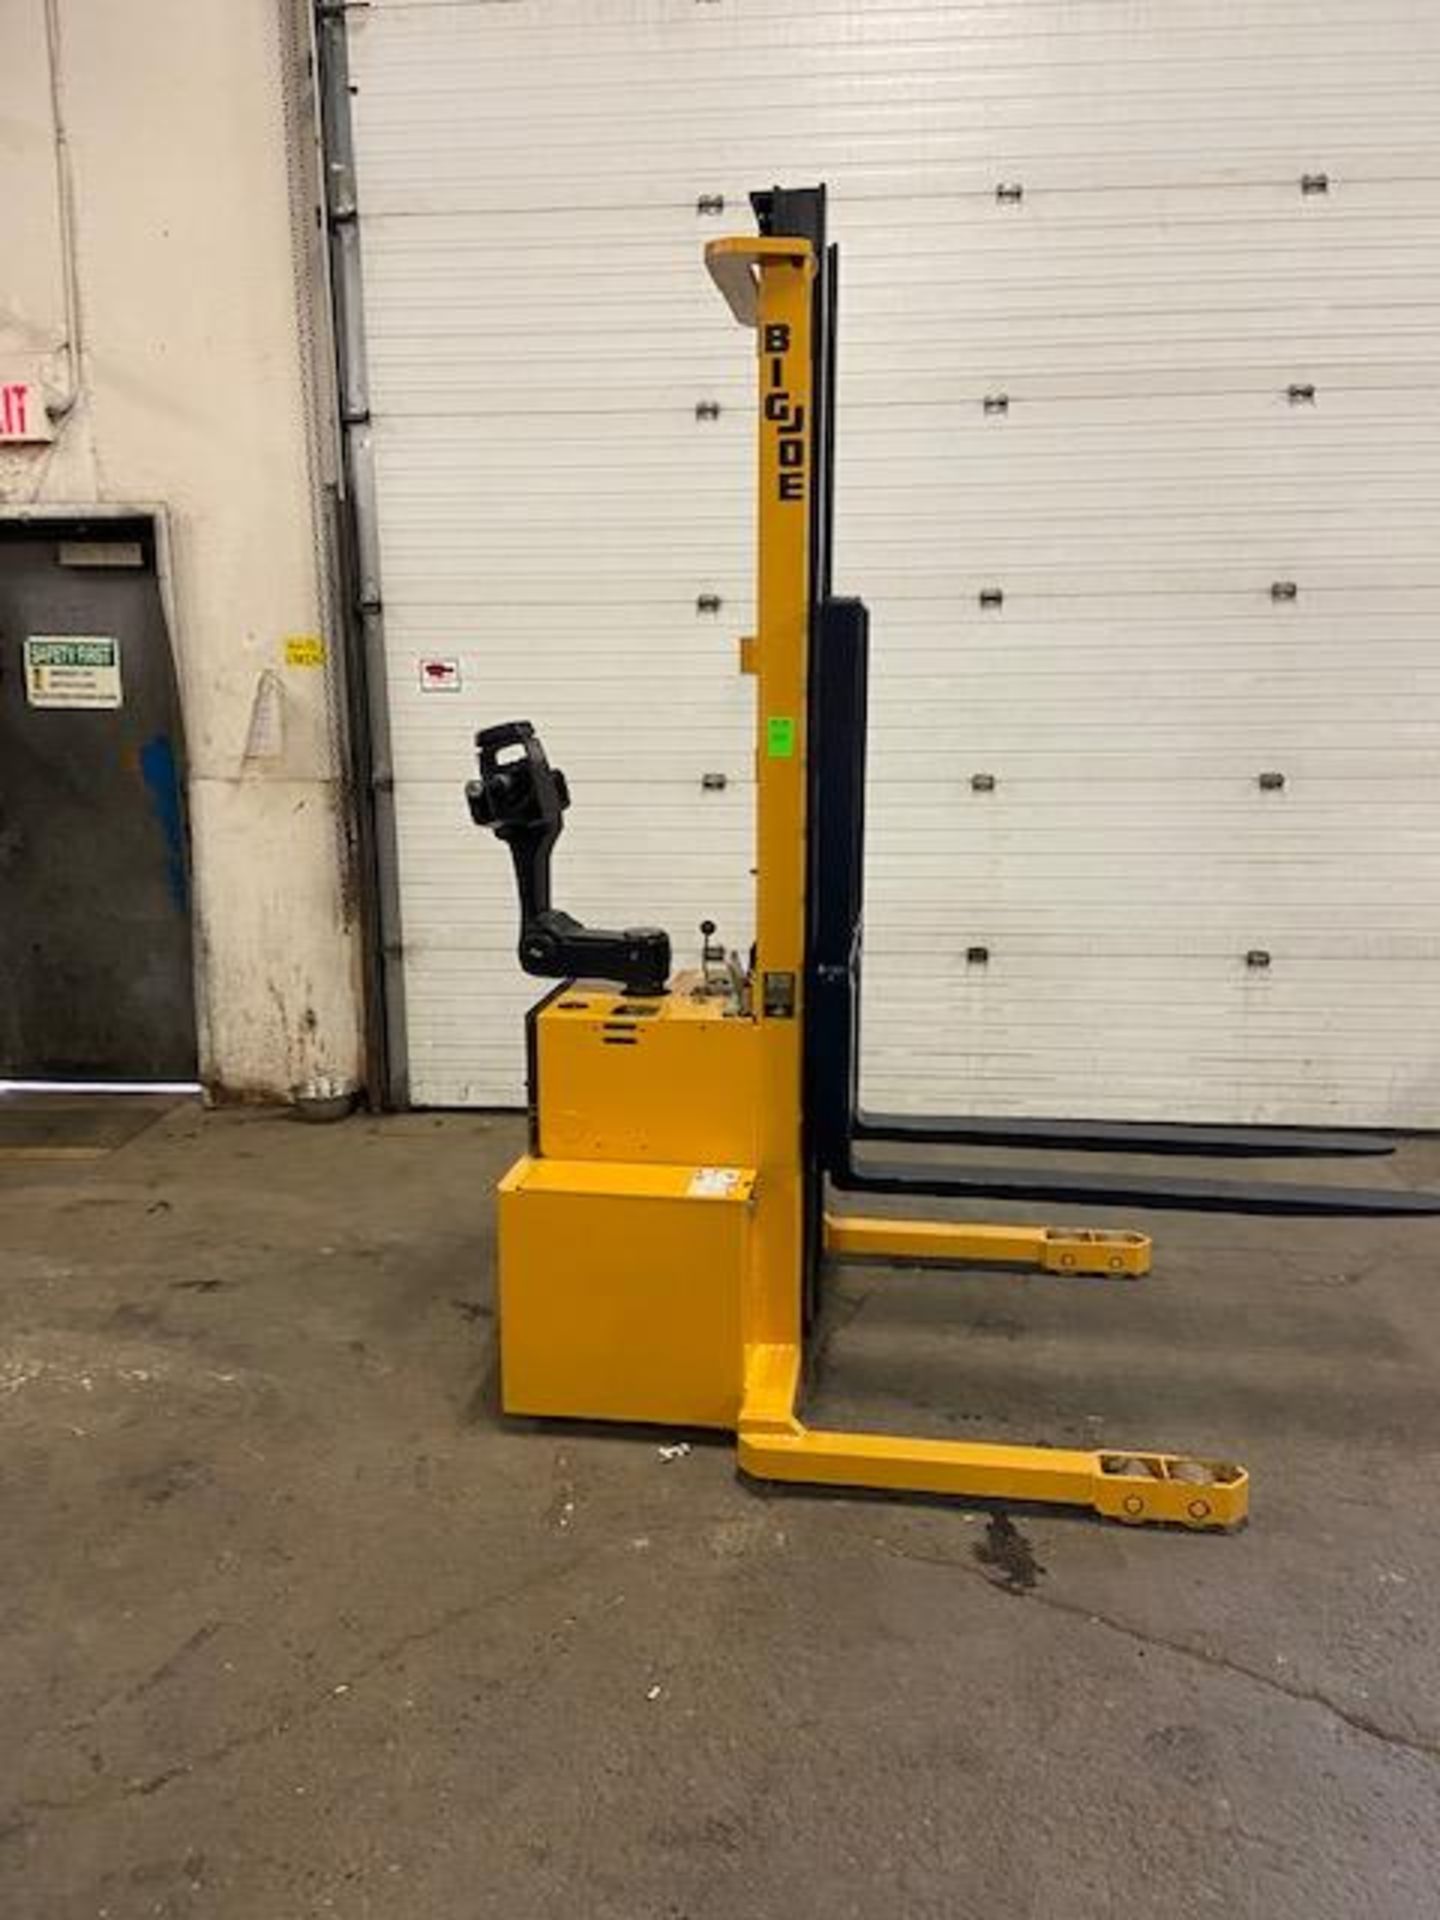 FREE CUSTOMS - Big Joe Order Picker 3000lbs capacity Electric Powered Pallet Cart Lifter EXTREMELY